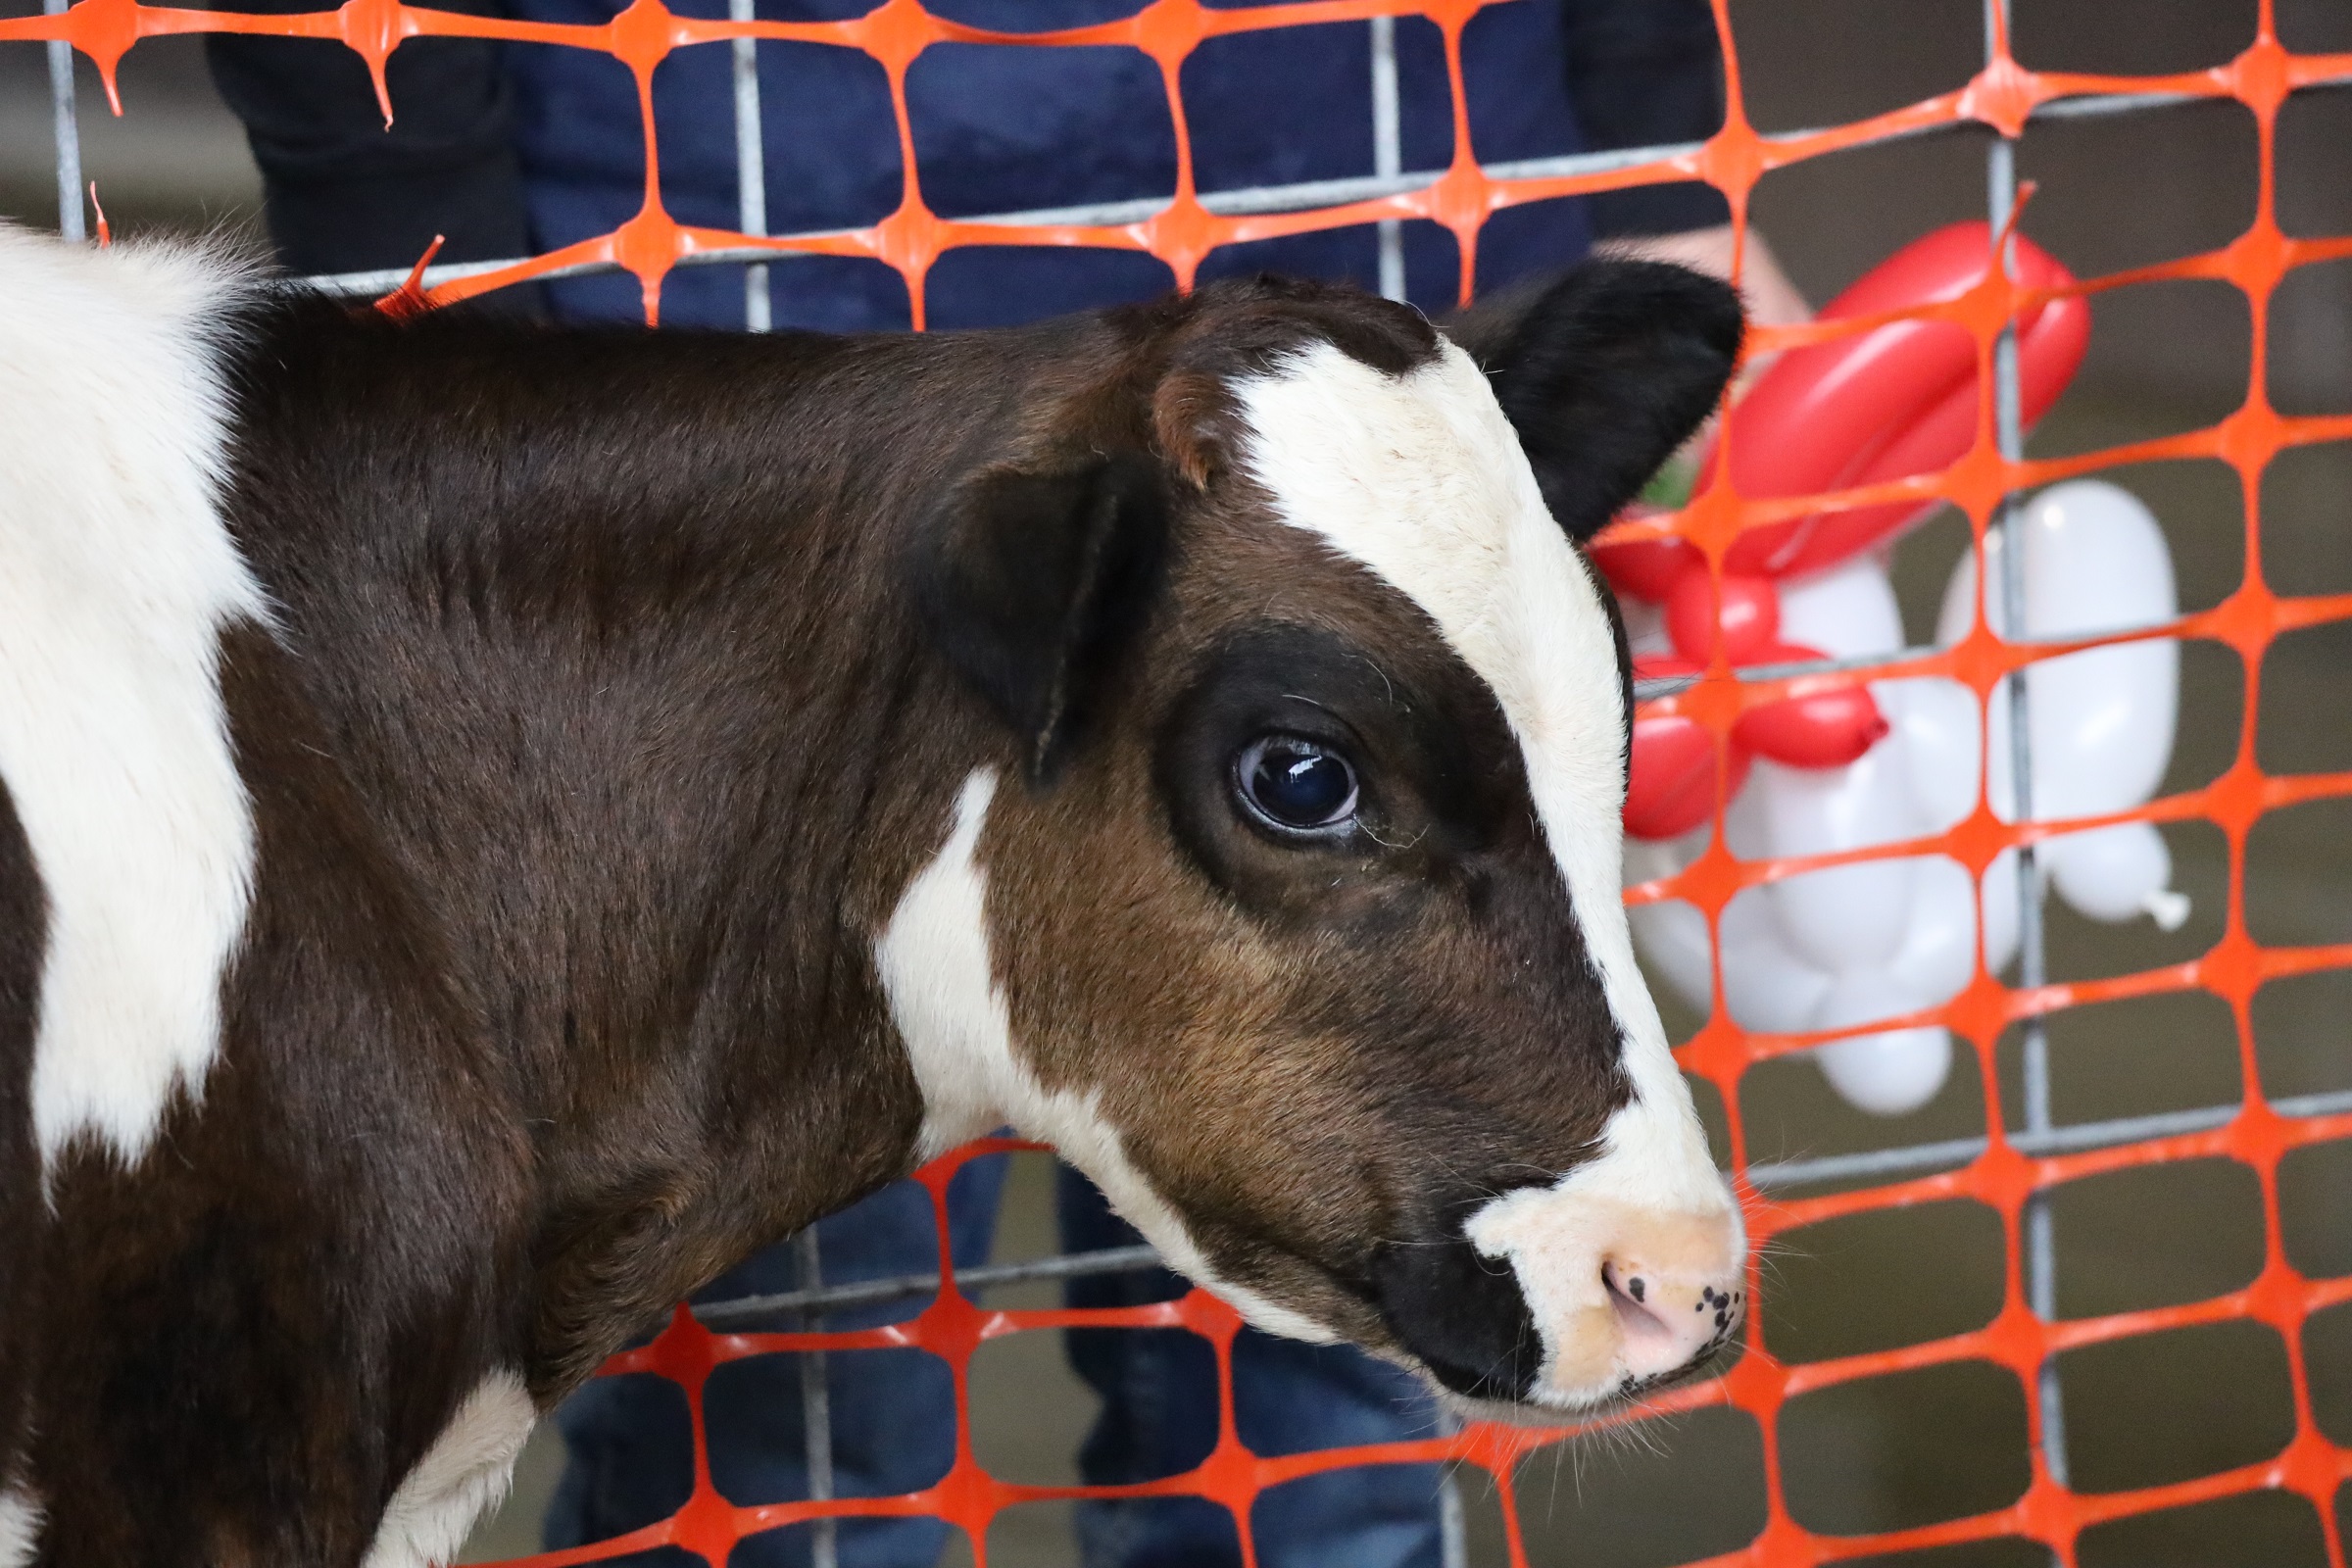 close-up photo of a baby cow with a brown and white face